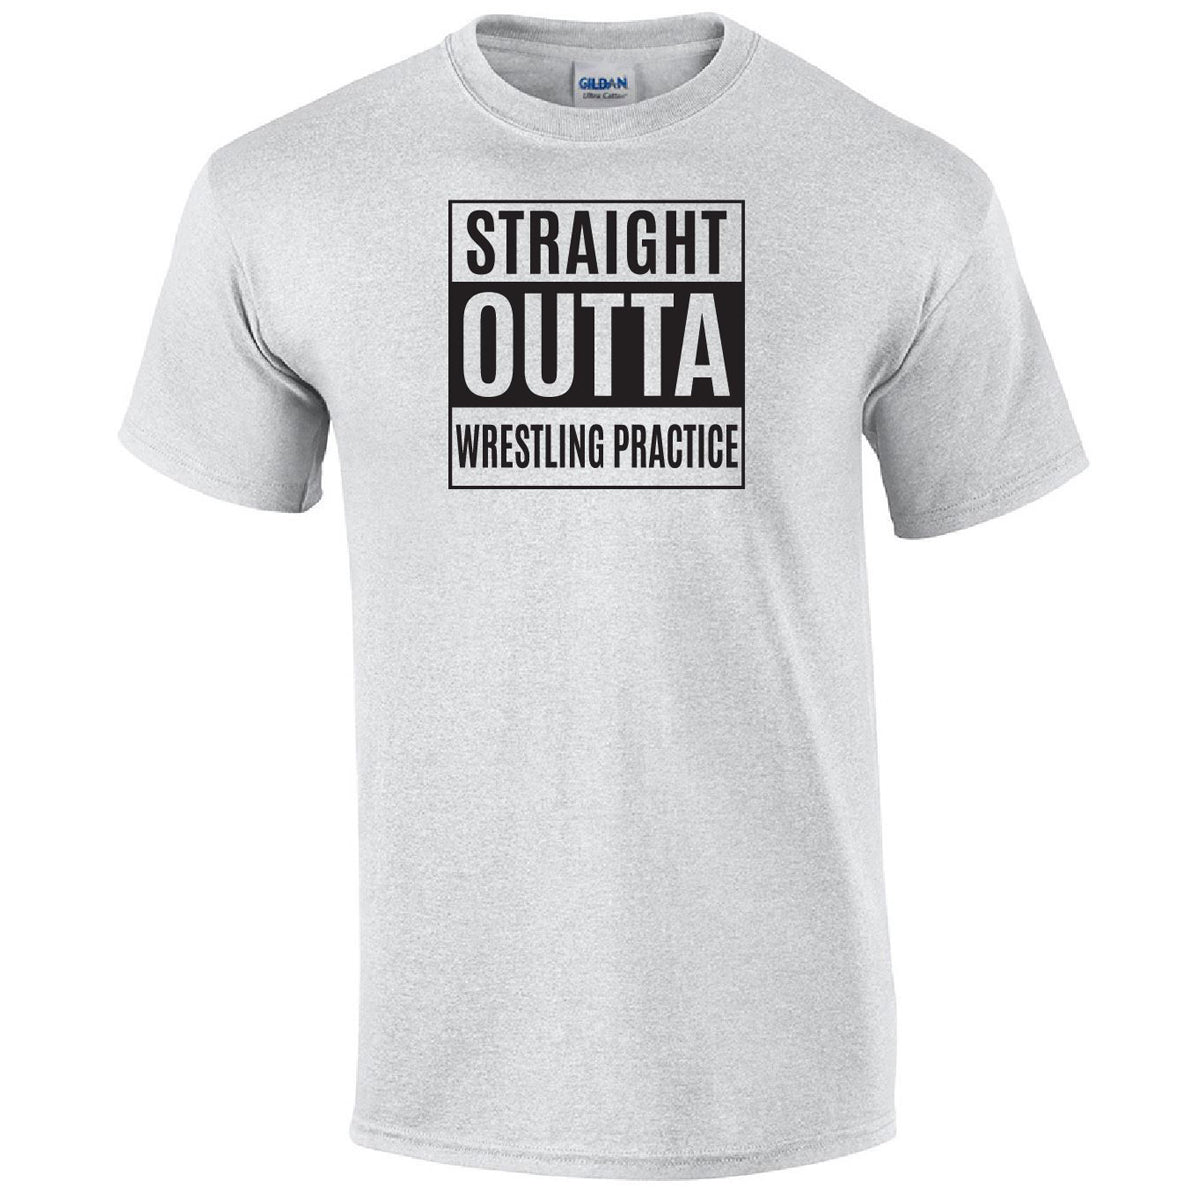 Straight Outta Wrestling Practice Printed Tee Humorous Shirt 411 Youth Medium Ash 